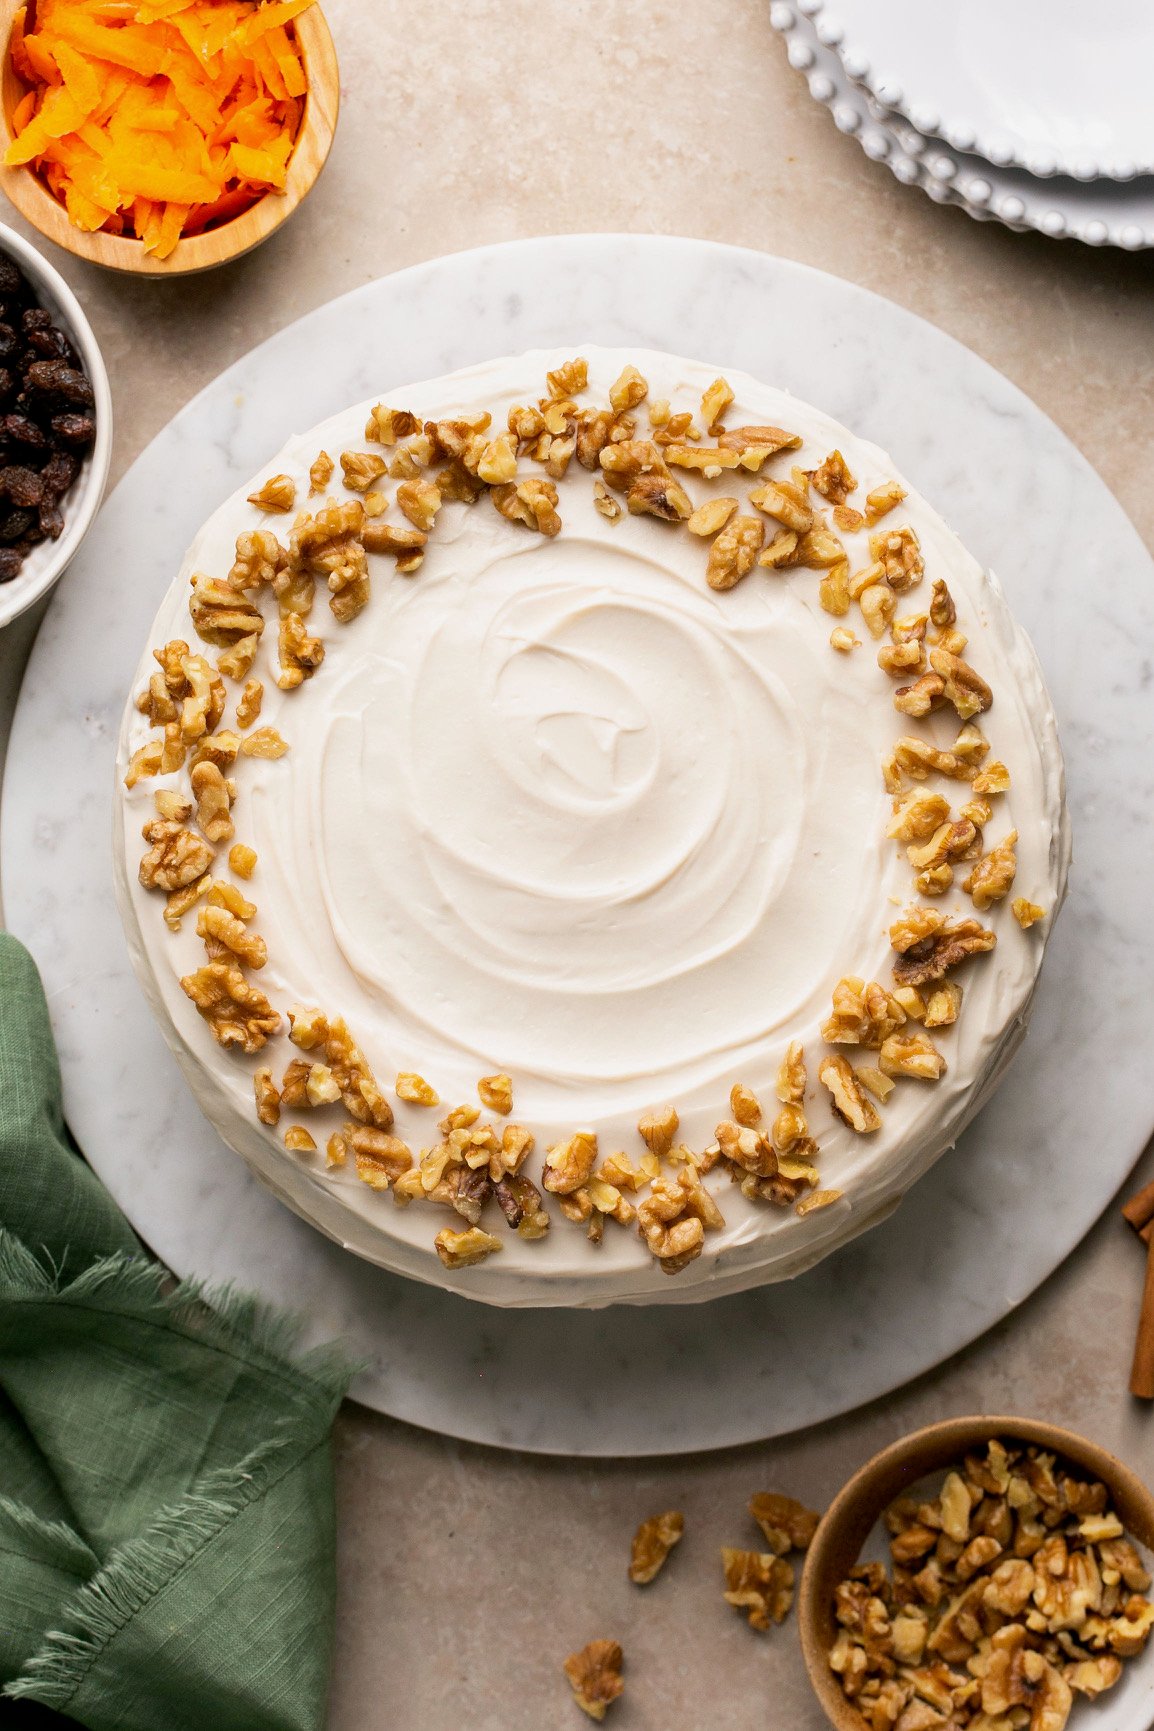 an overhead shot of carrot cake with walnuts surrounded by carrots, walnuts, a napkin, and plates.